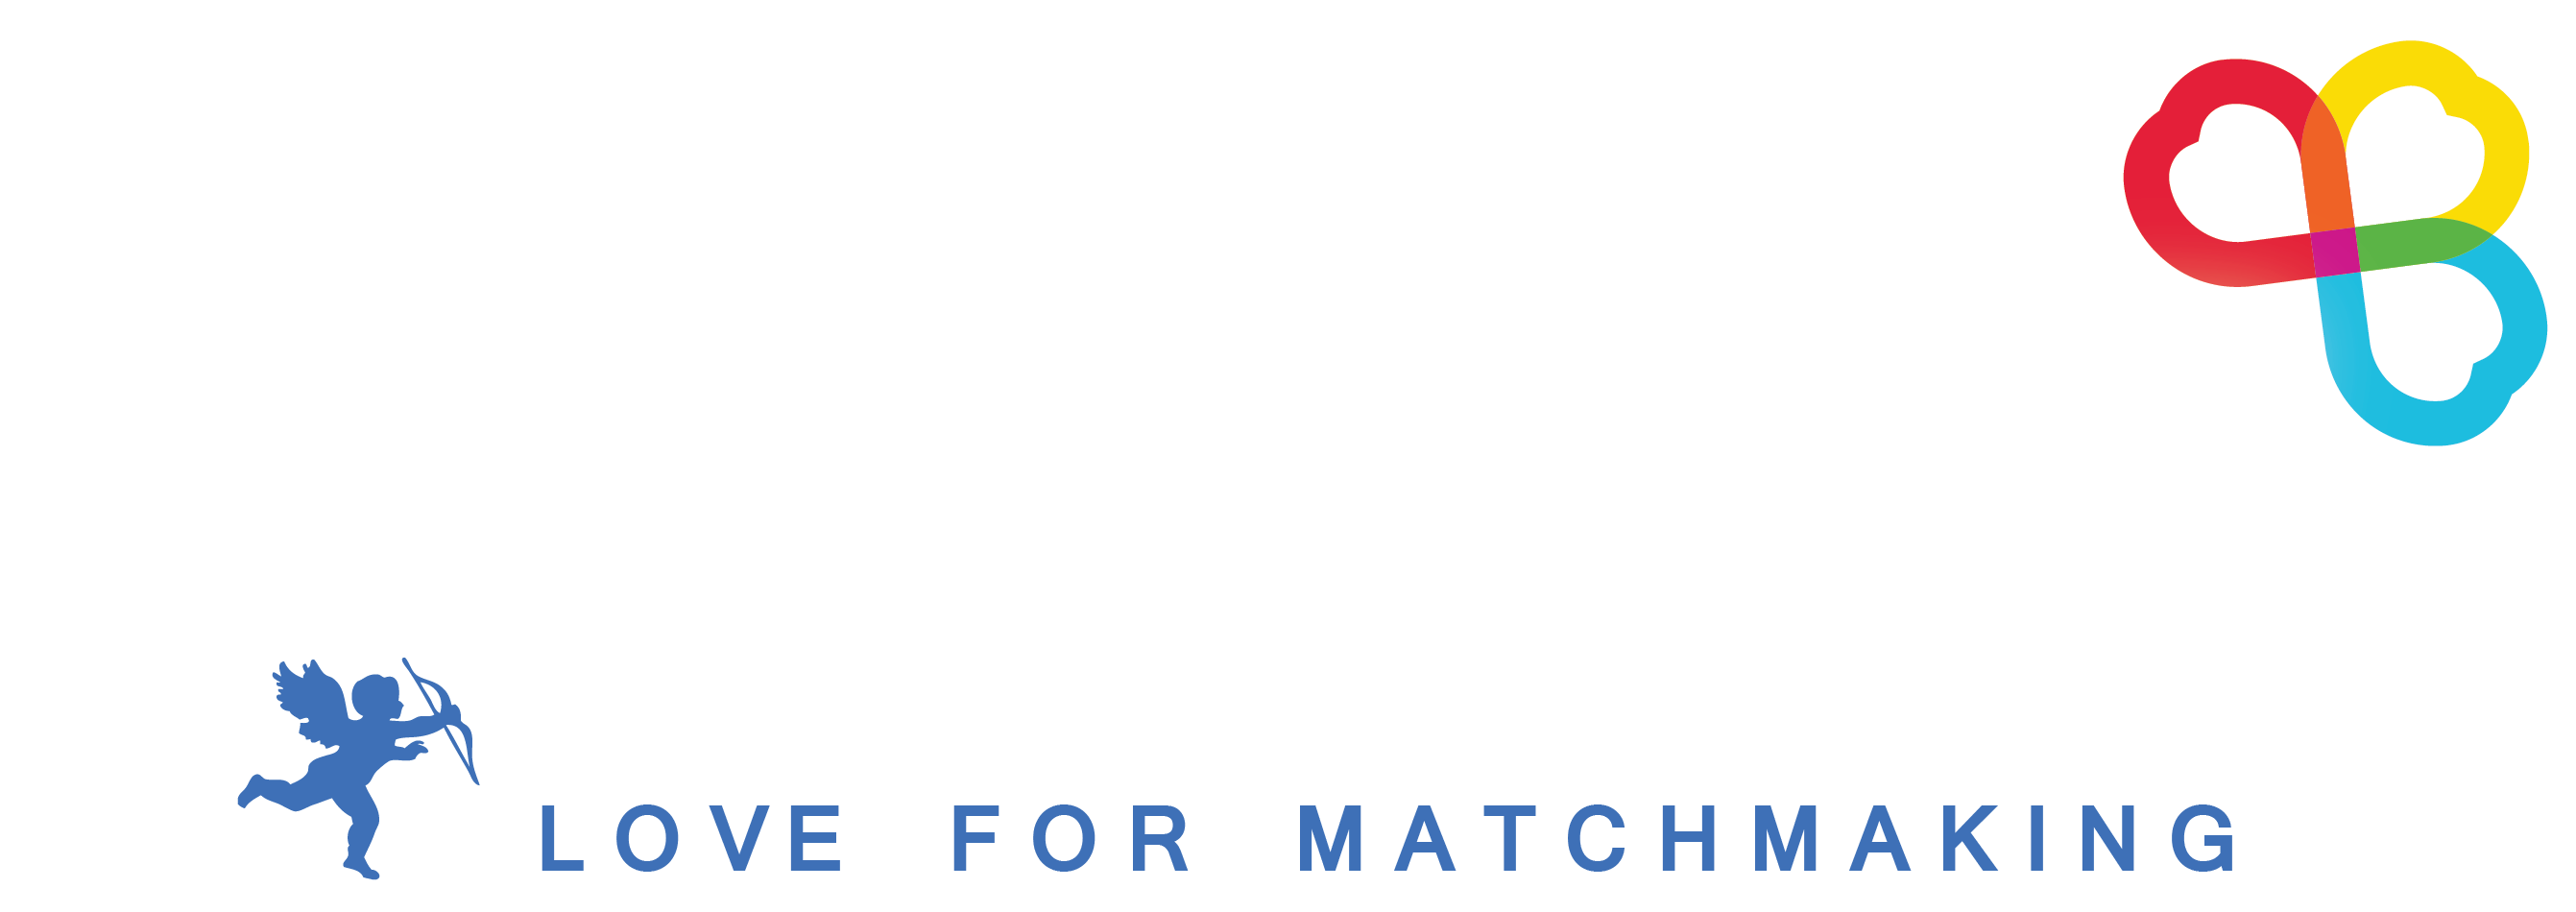 Gay Matchmaker Festival | Weekend Club Nights - The Outing